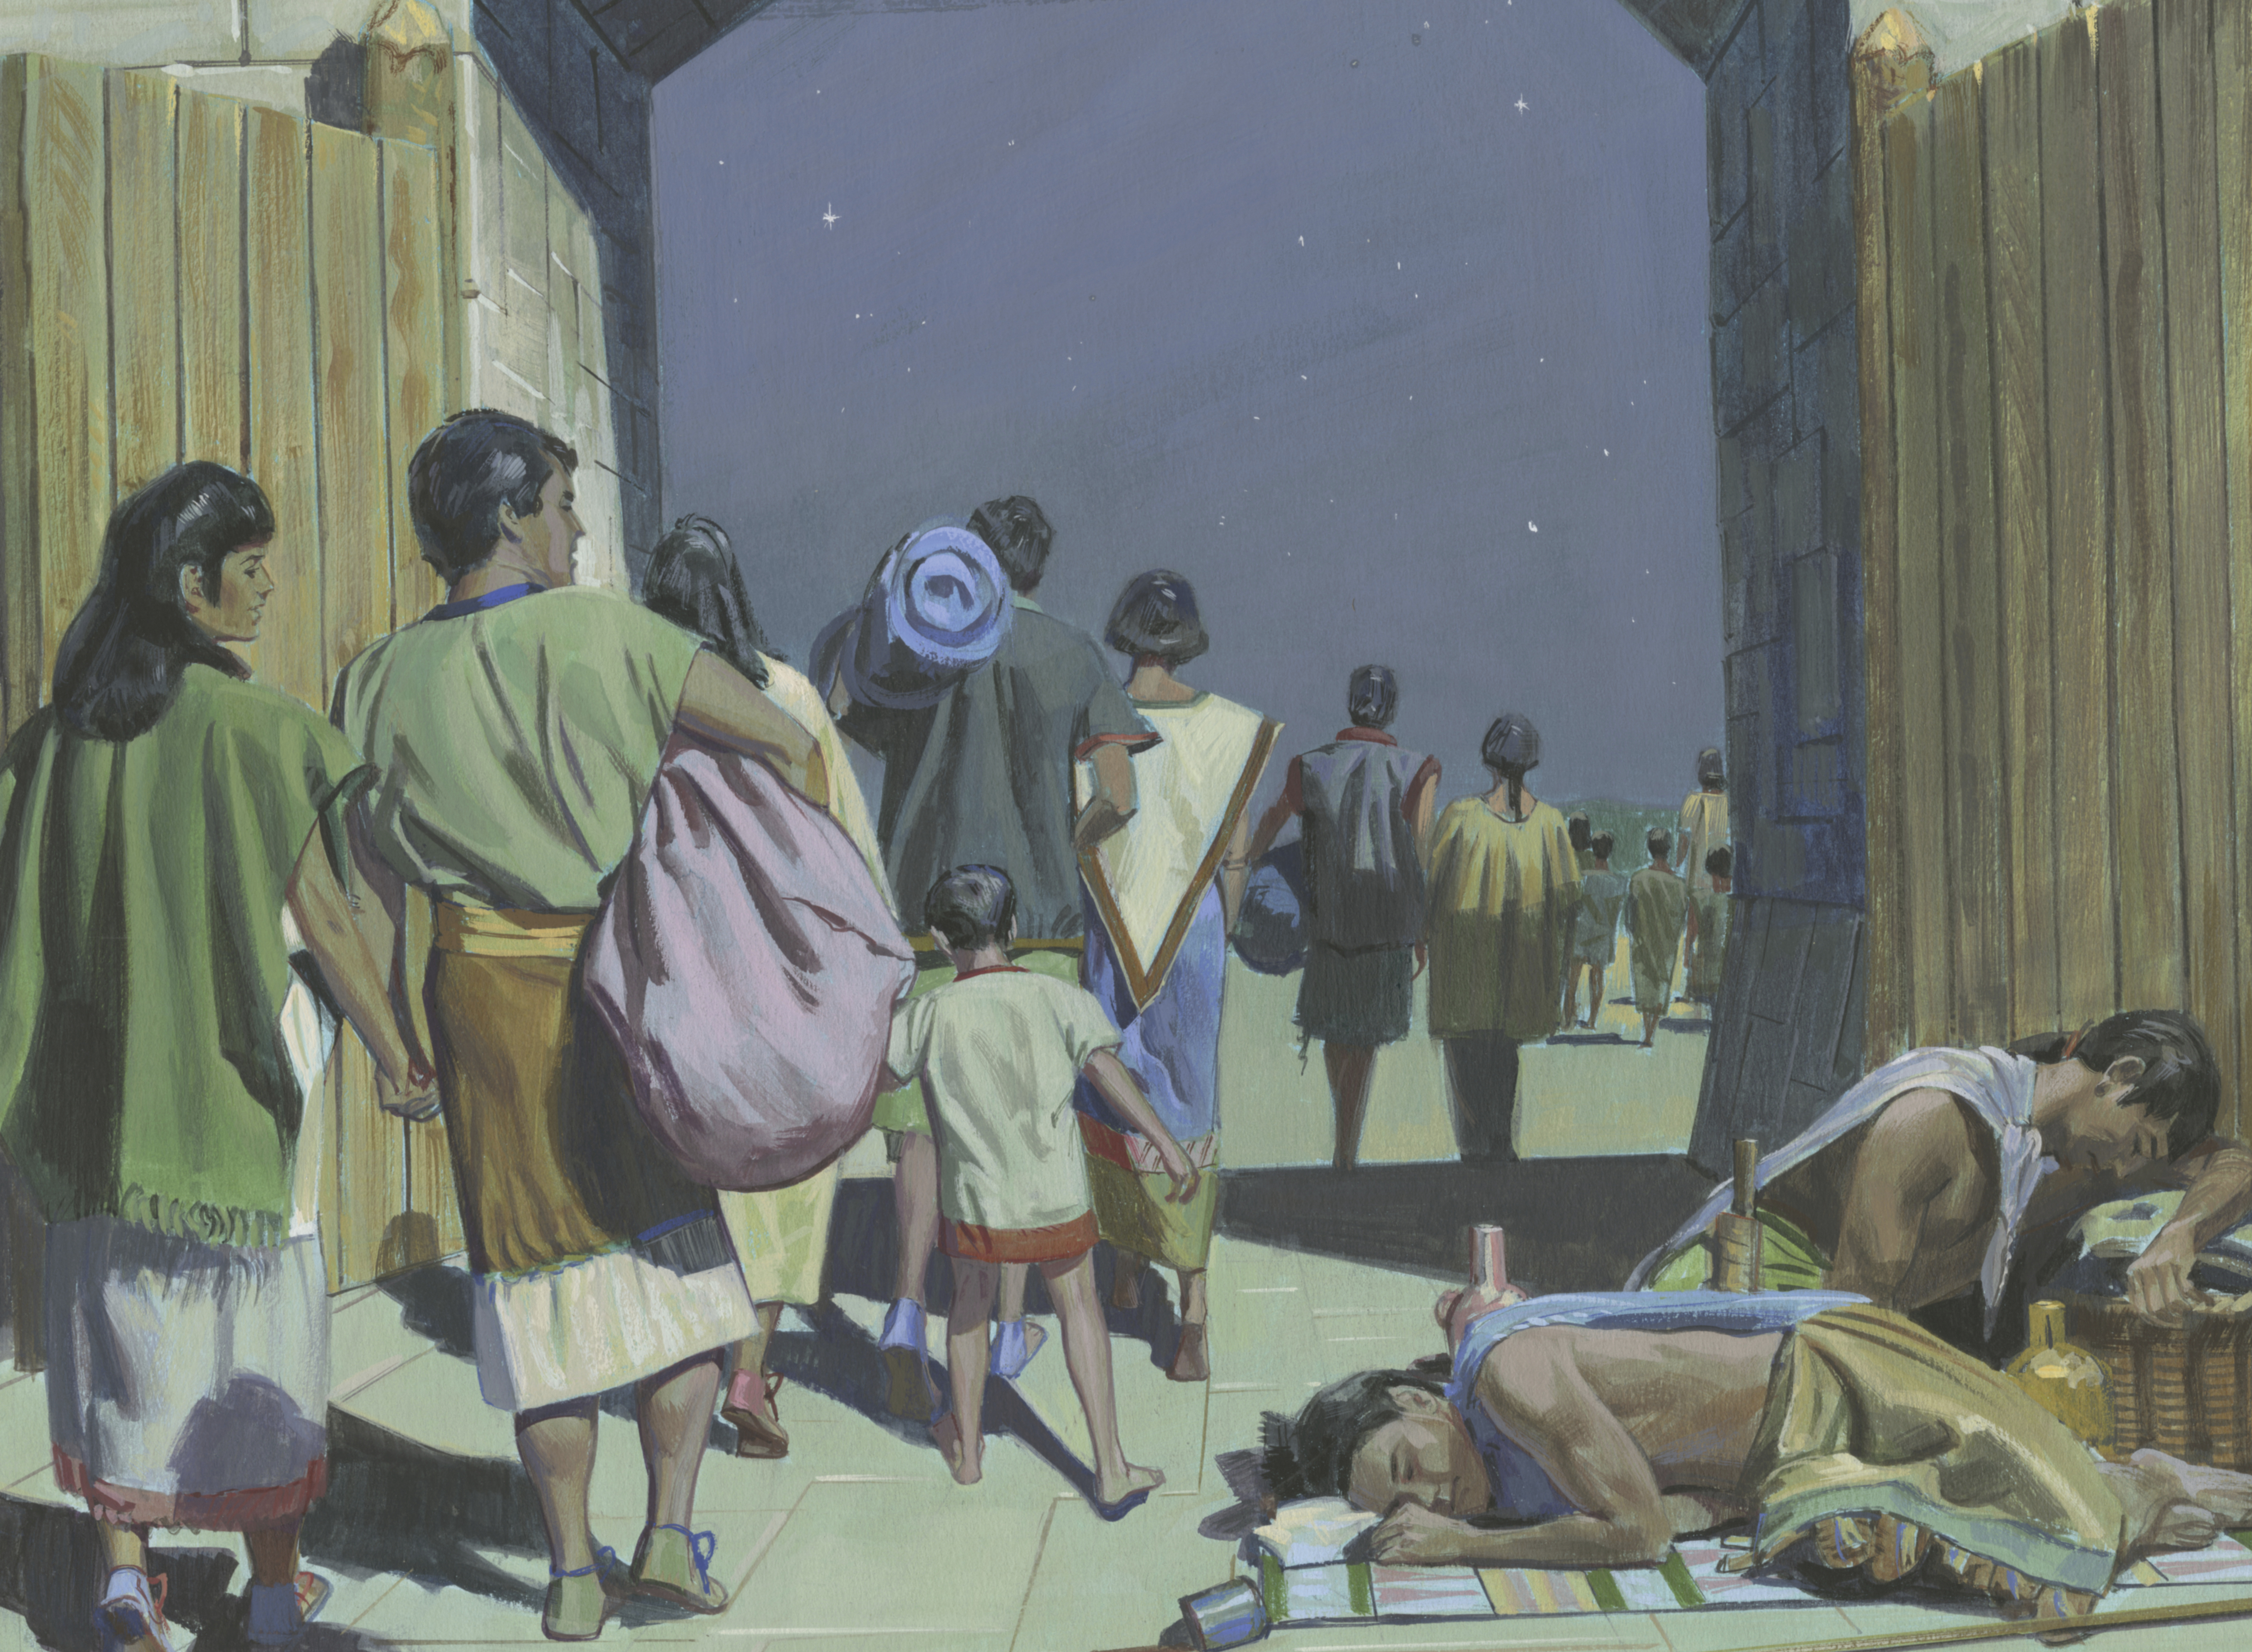 A painting by Jerry Thompson depicting King Limhi’s people escaping captivity; Primary manual 4-25